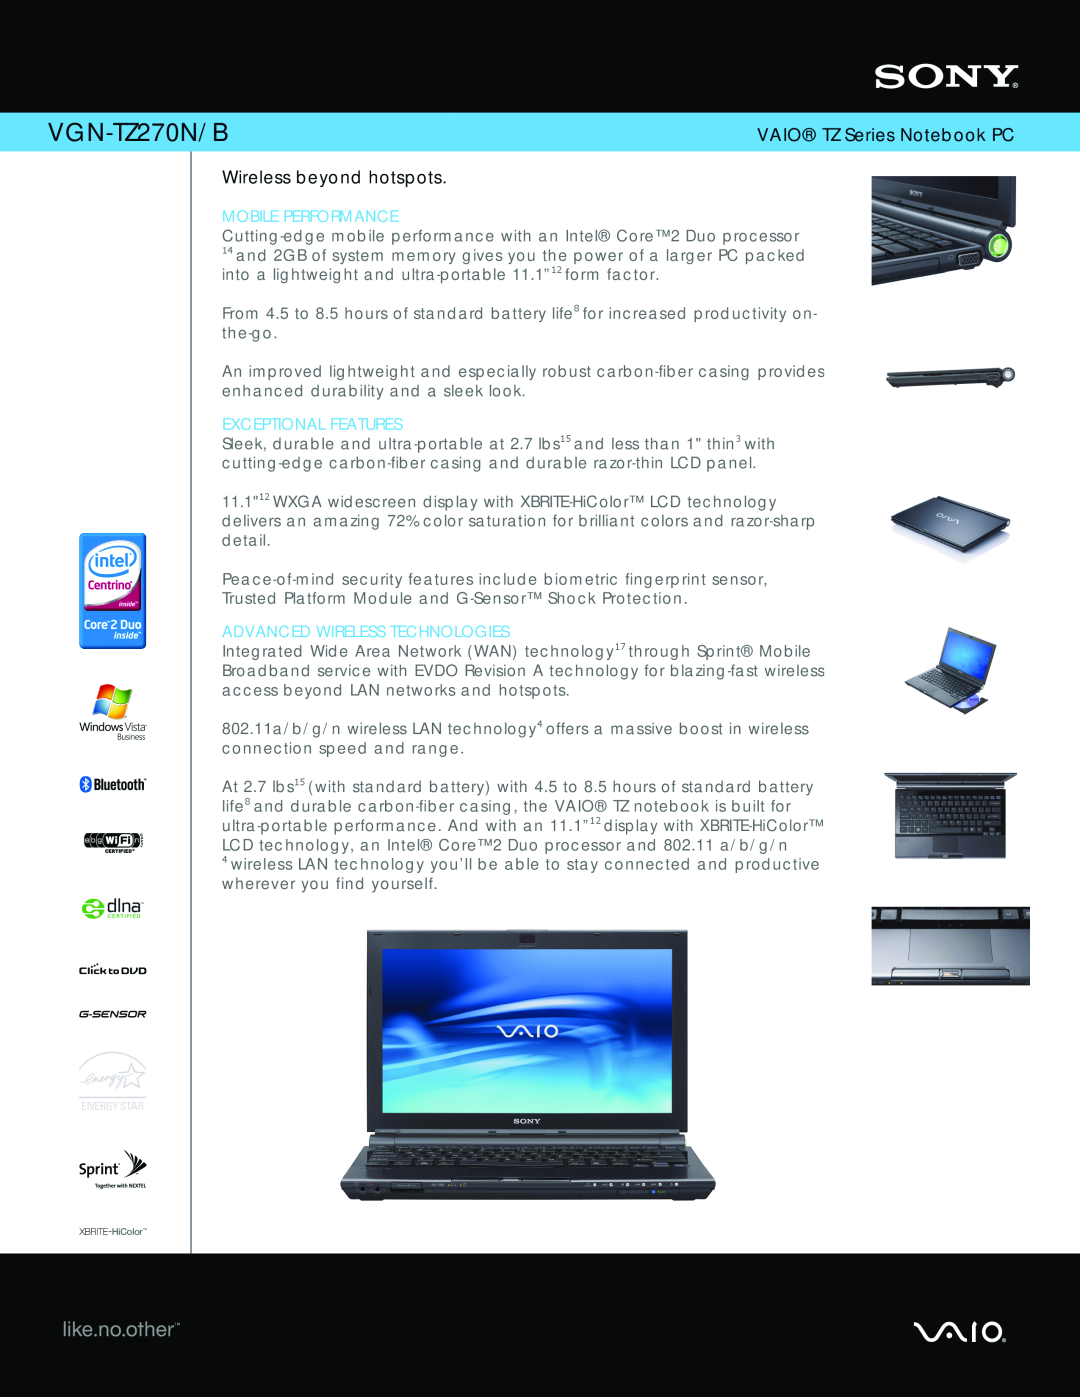 Sony VGN-TZ270N/B manual VAIO TZ Series Notebook PC, Wireless beyond hotspots, Mobile Performance, Exceptional Features 